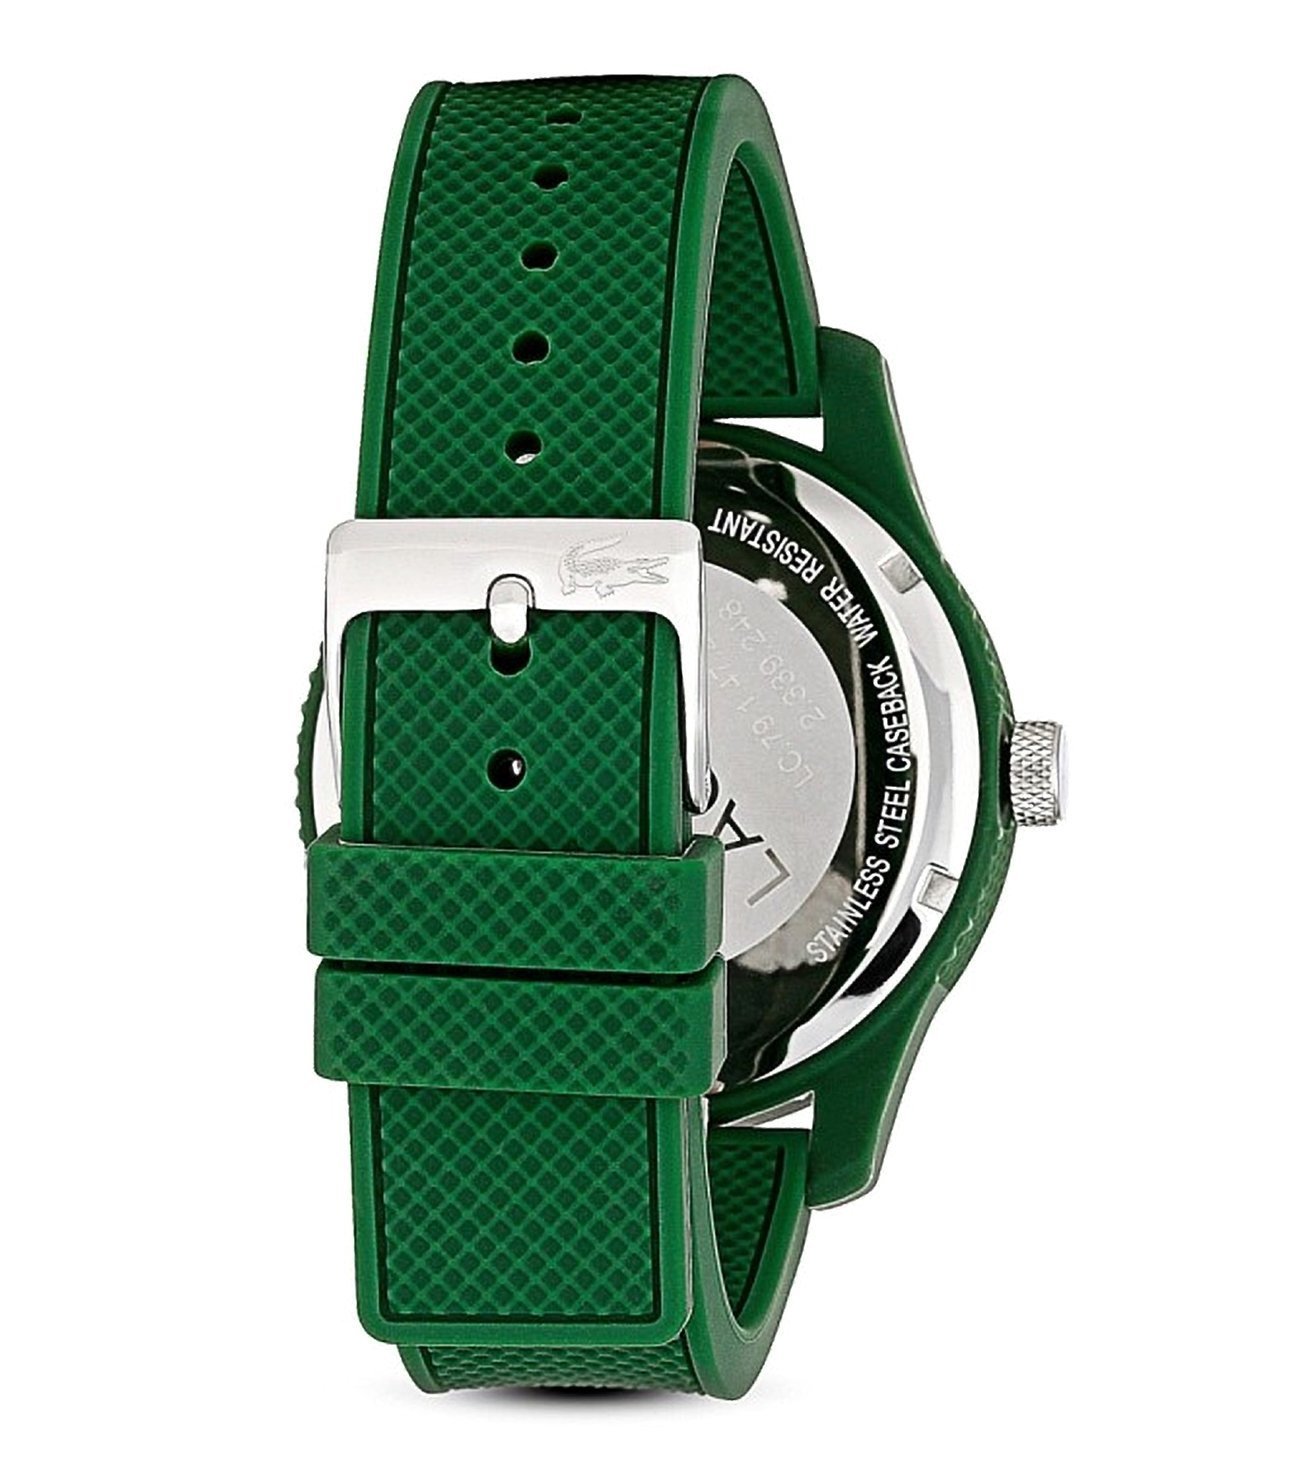 lacoste watch lc 79